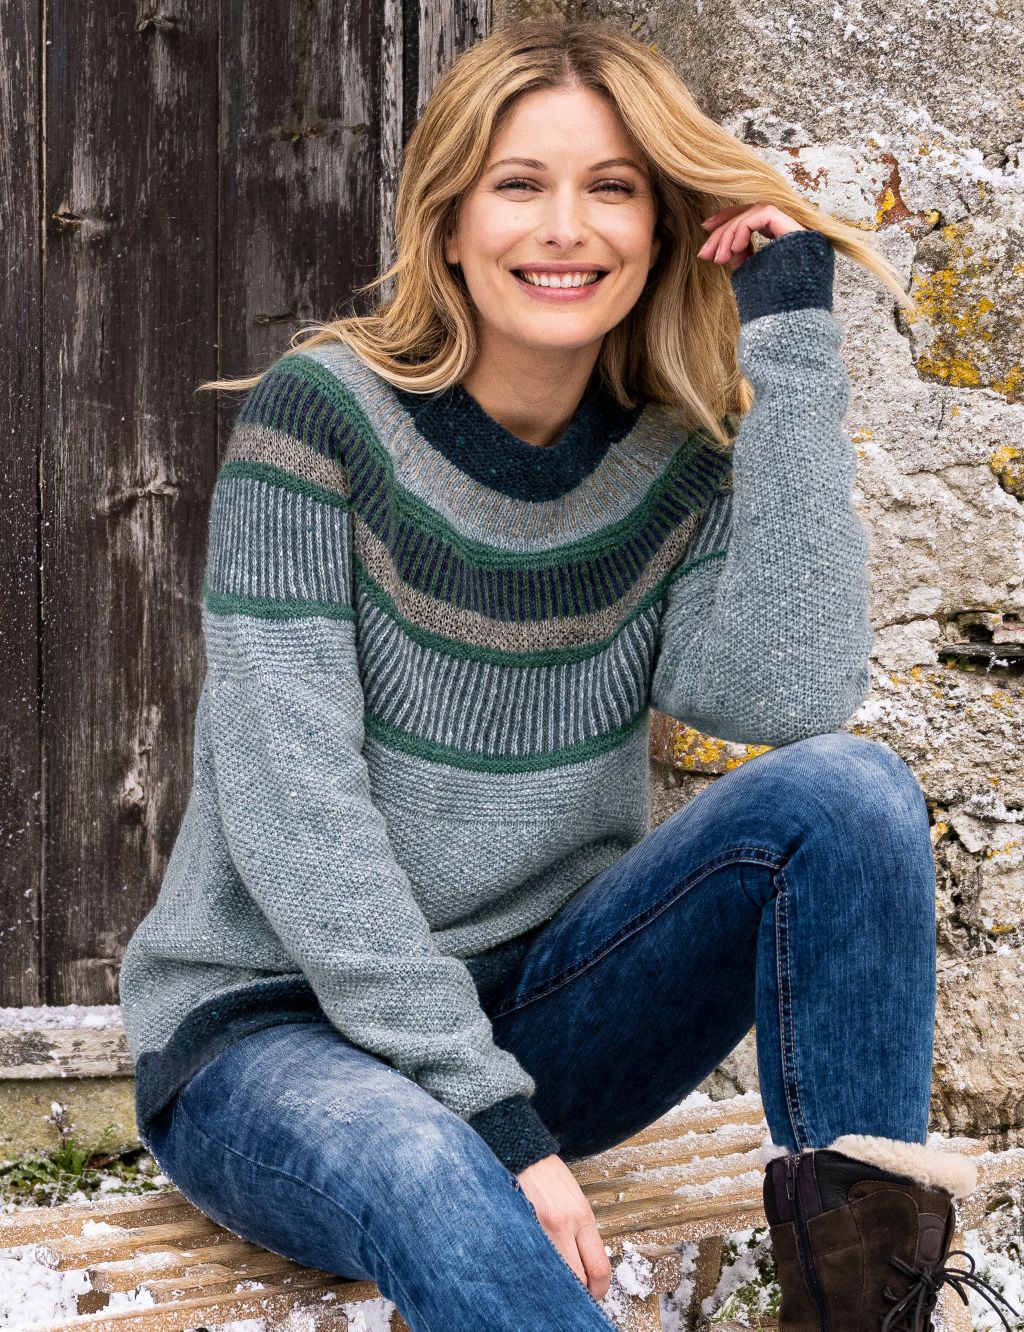 Pure Wool Striped Crew Neck Jumper image 3